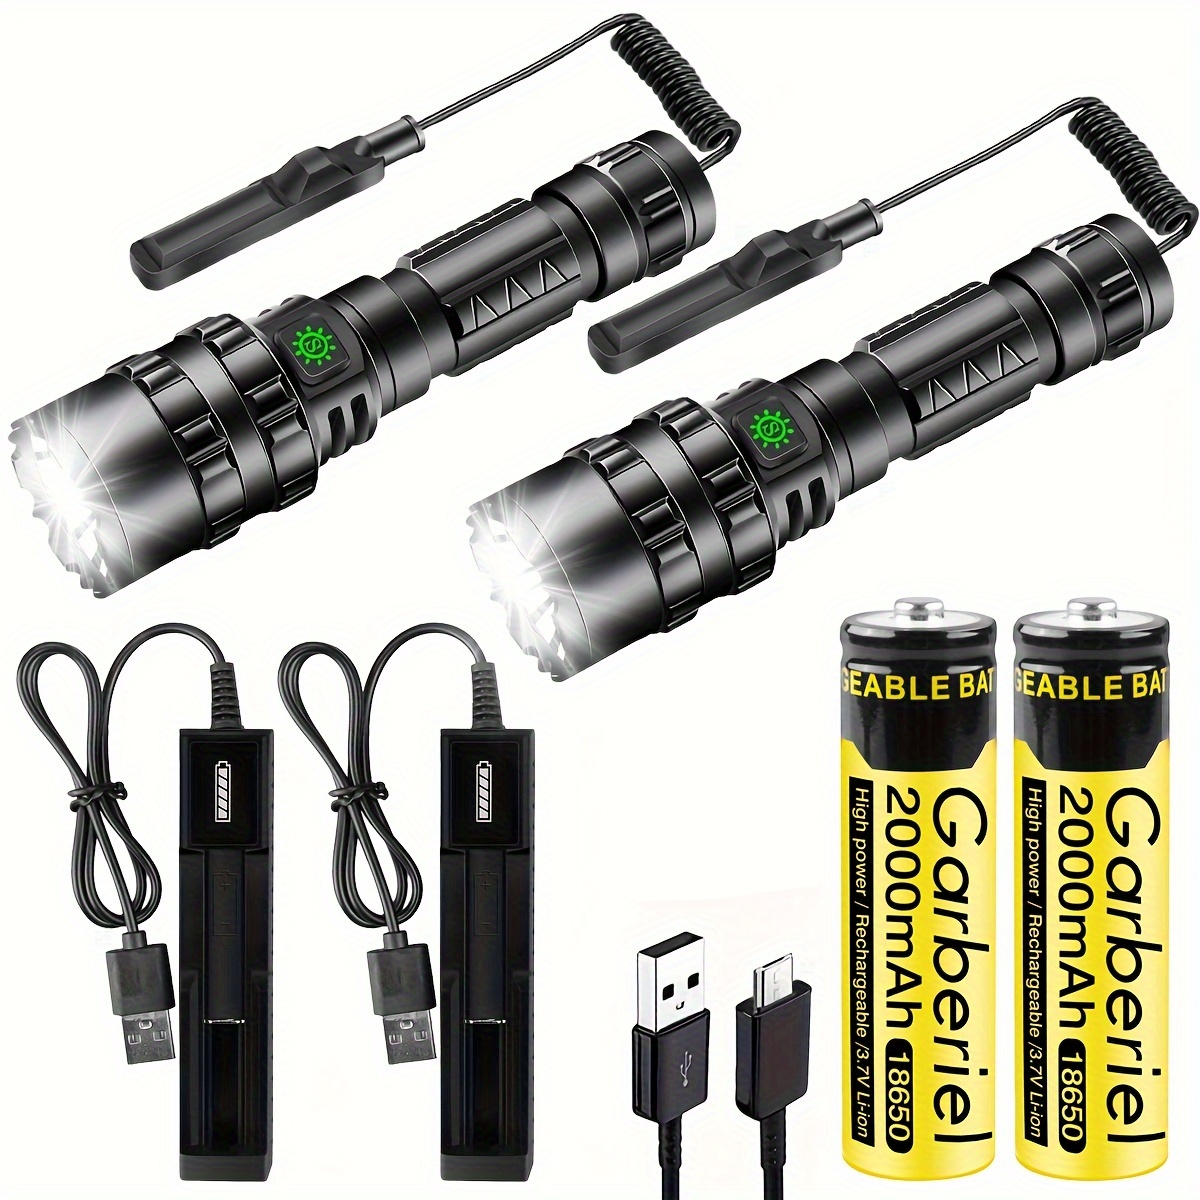 

2pack High Lumens Led Flashlight With Mount, 5 Modes Powerful Usb Rechargeable Torch Light W/18650 Battery And Charger For Camping/hunting (remote Pressure Switch Included)